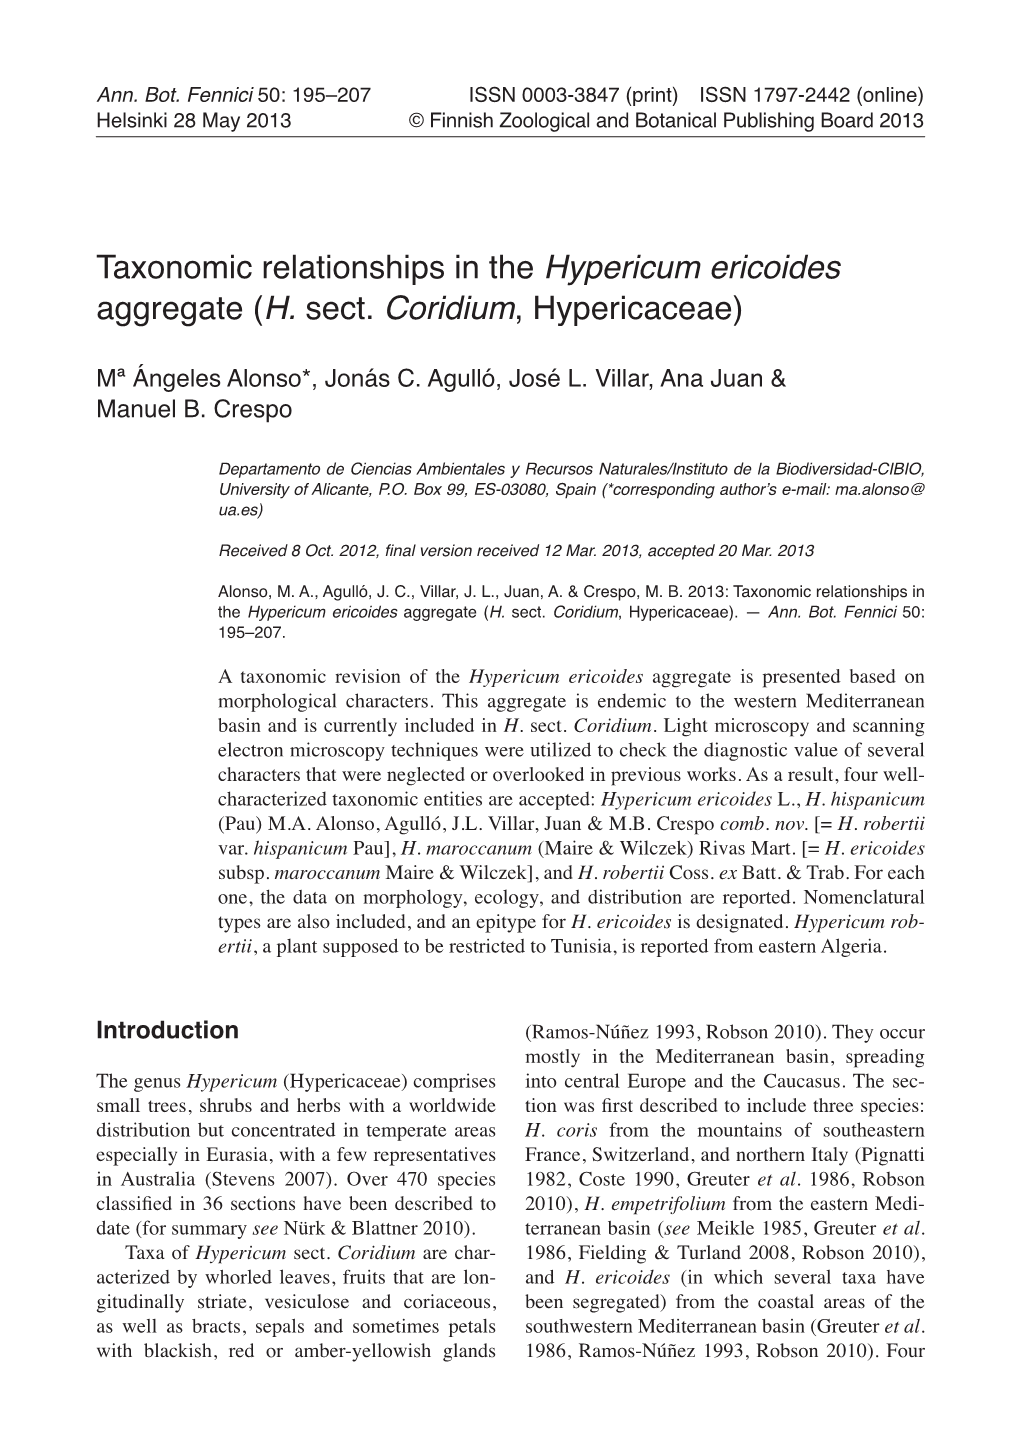 Taxonomic Relationships in the Hypericum Ericoides Aggregate (H